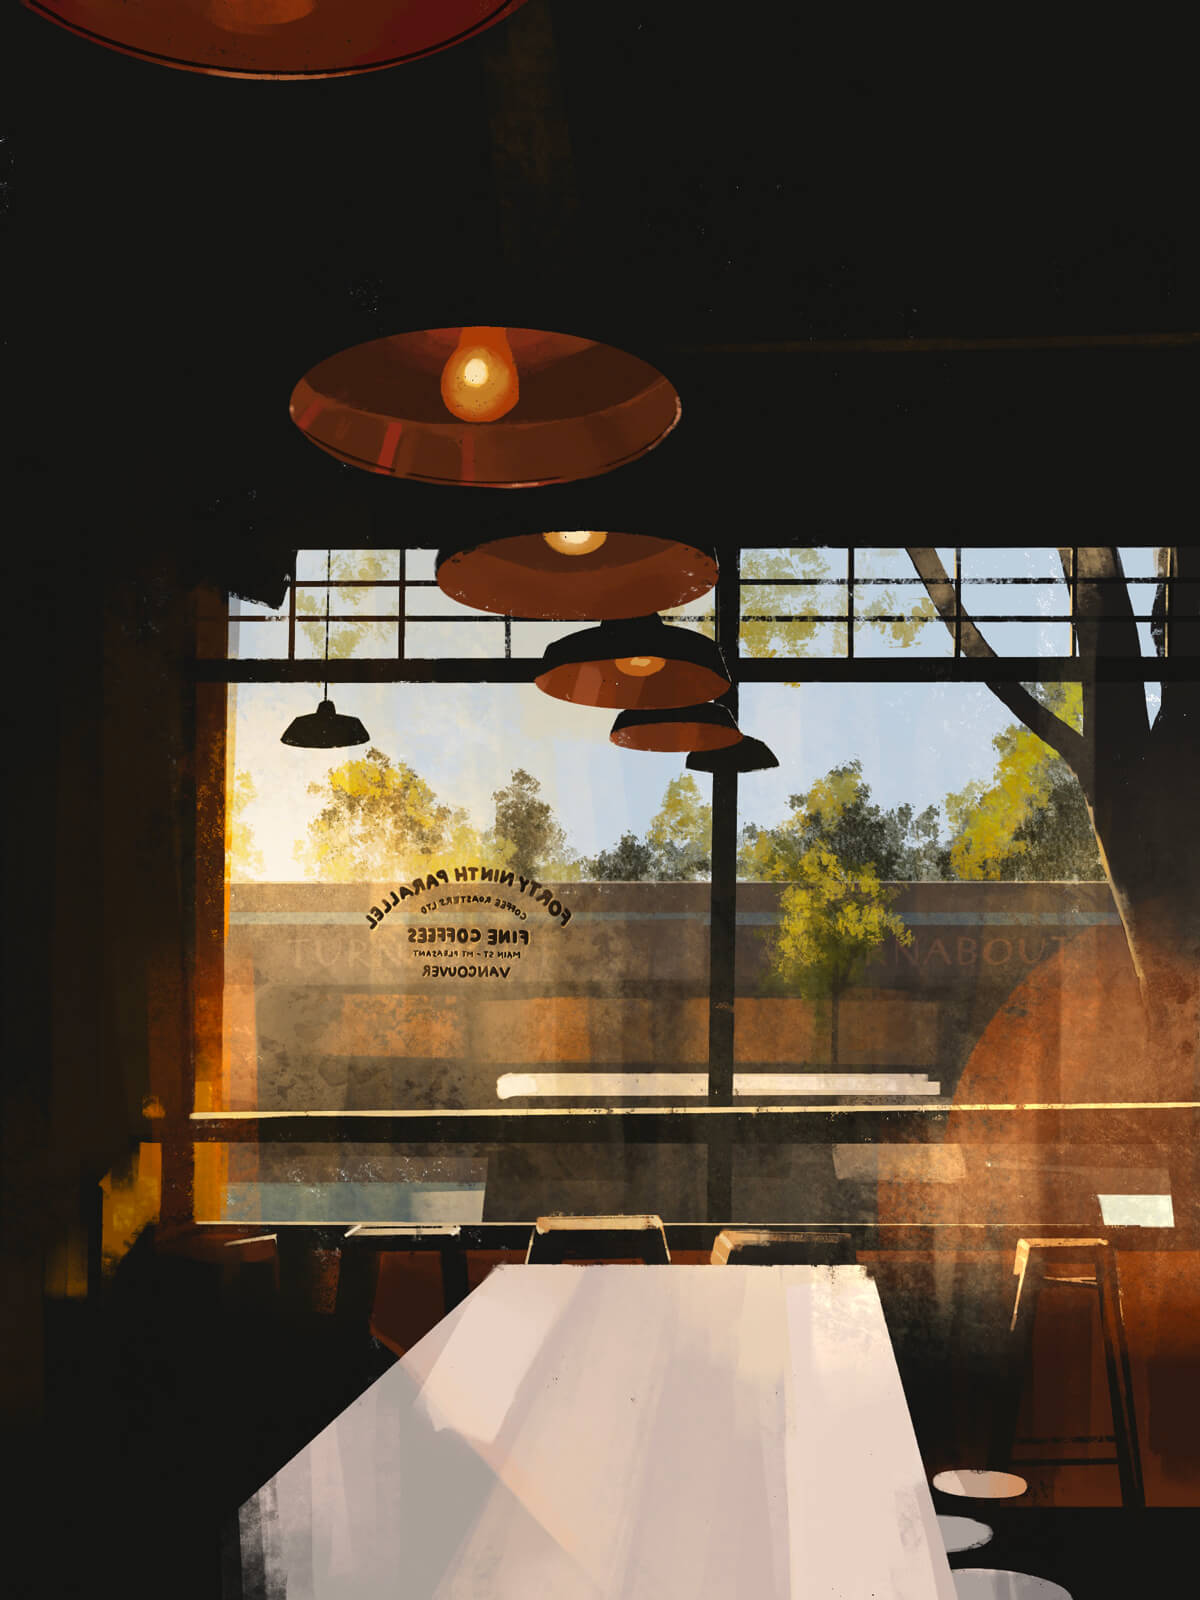 Digital painting of the shadowed interior of a cafe, looking out the window. Lights hang from the ceiling, and there’s a long wooden table in the foreground. Through the window filters strong yellow lighting.